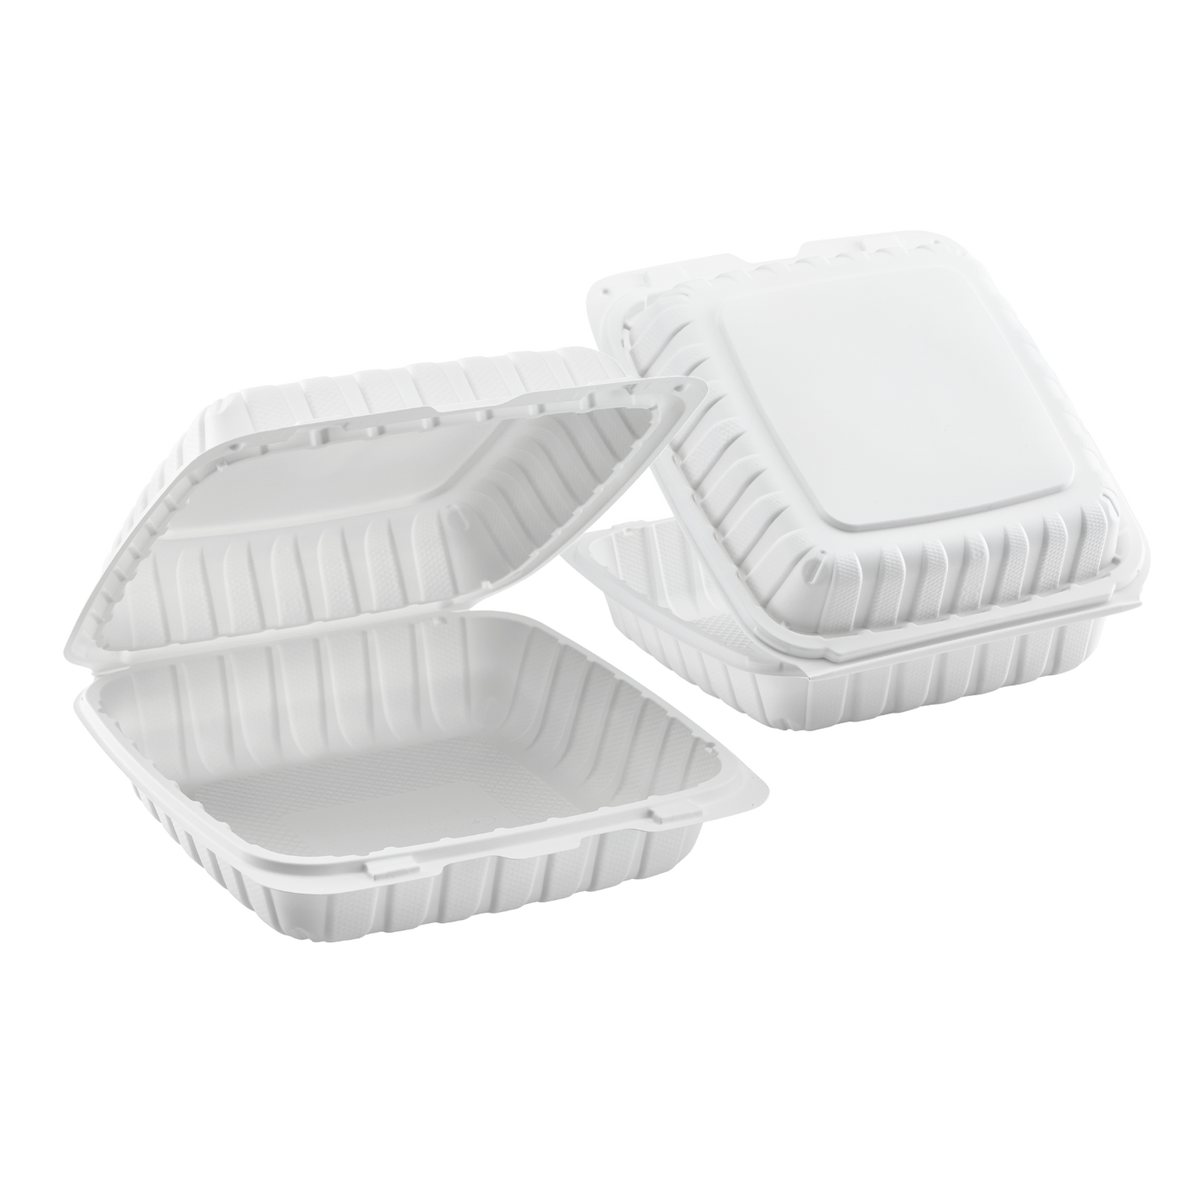 https://www.restaurantsupplydrops.shop/wp-content/uploads/1689/34/find-jumbo-white-takeout-boxes-9x9-mineral-filled-hinged-food-containers-karat-earth-120ct-karat-at-low-cost_5.png